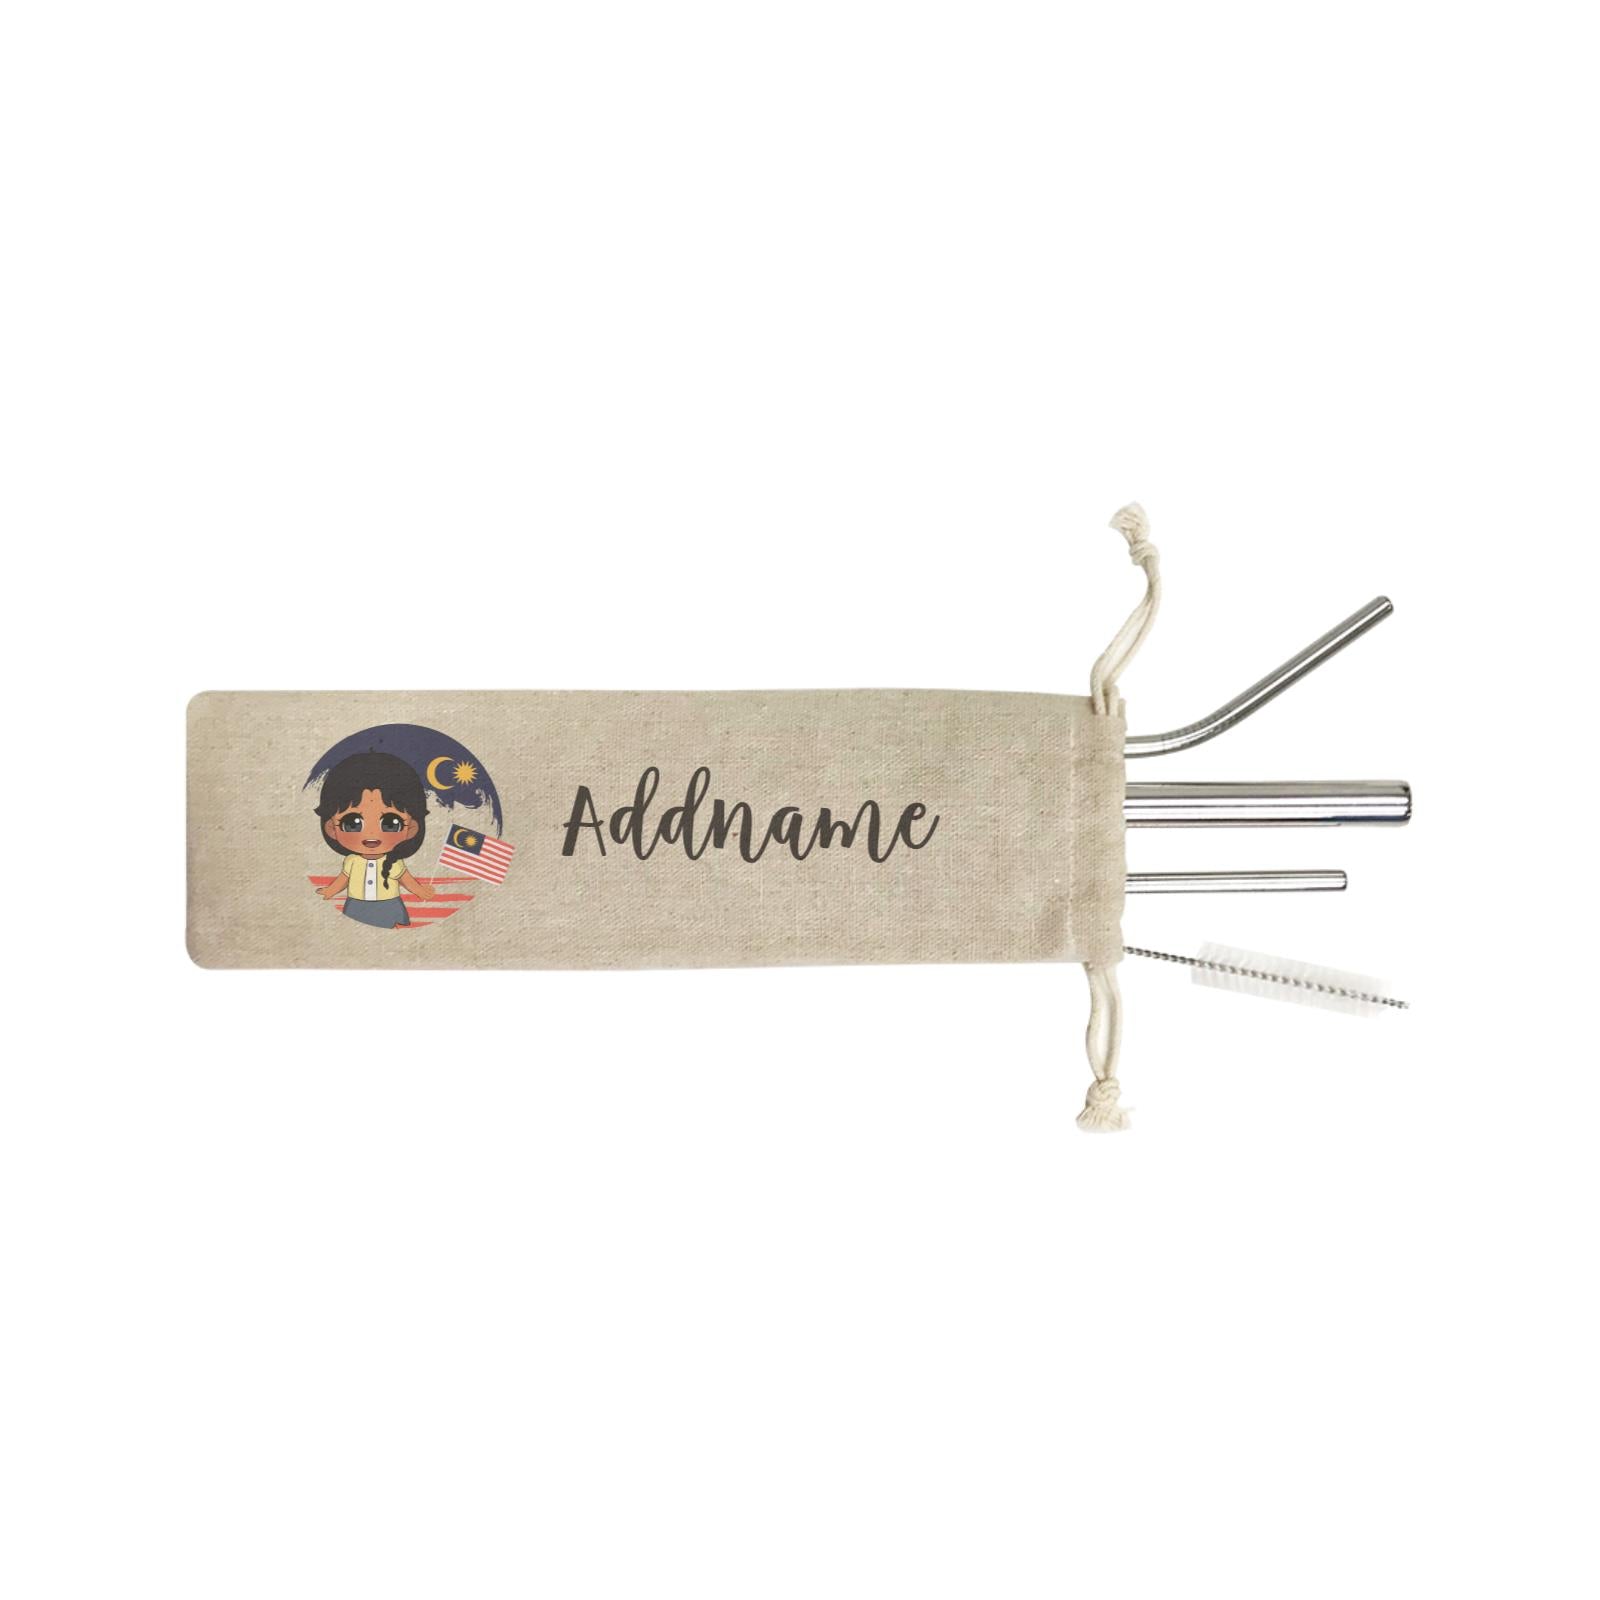 Merdeka Series Round Flag Indian Girl Addname SB 4-In-1 Stainless Steel Straw Set in Satchel